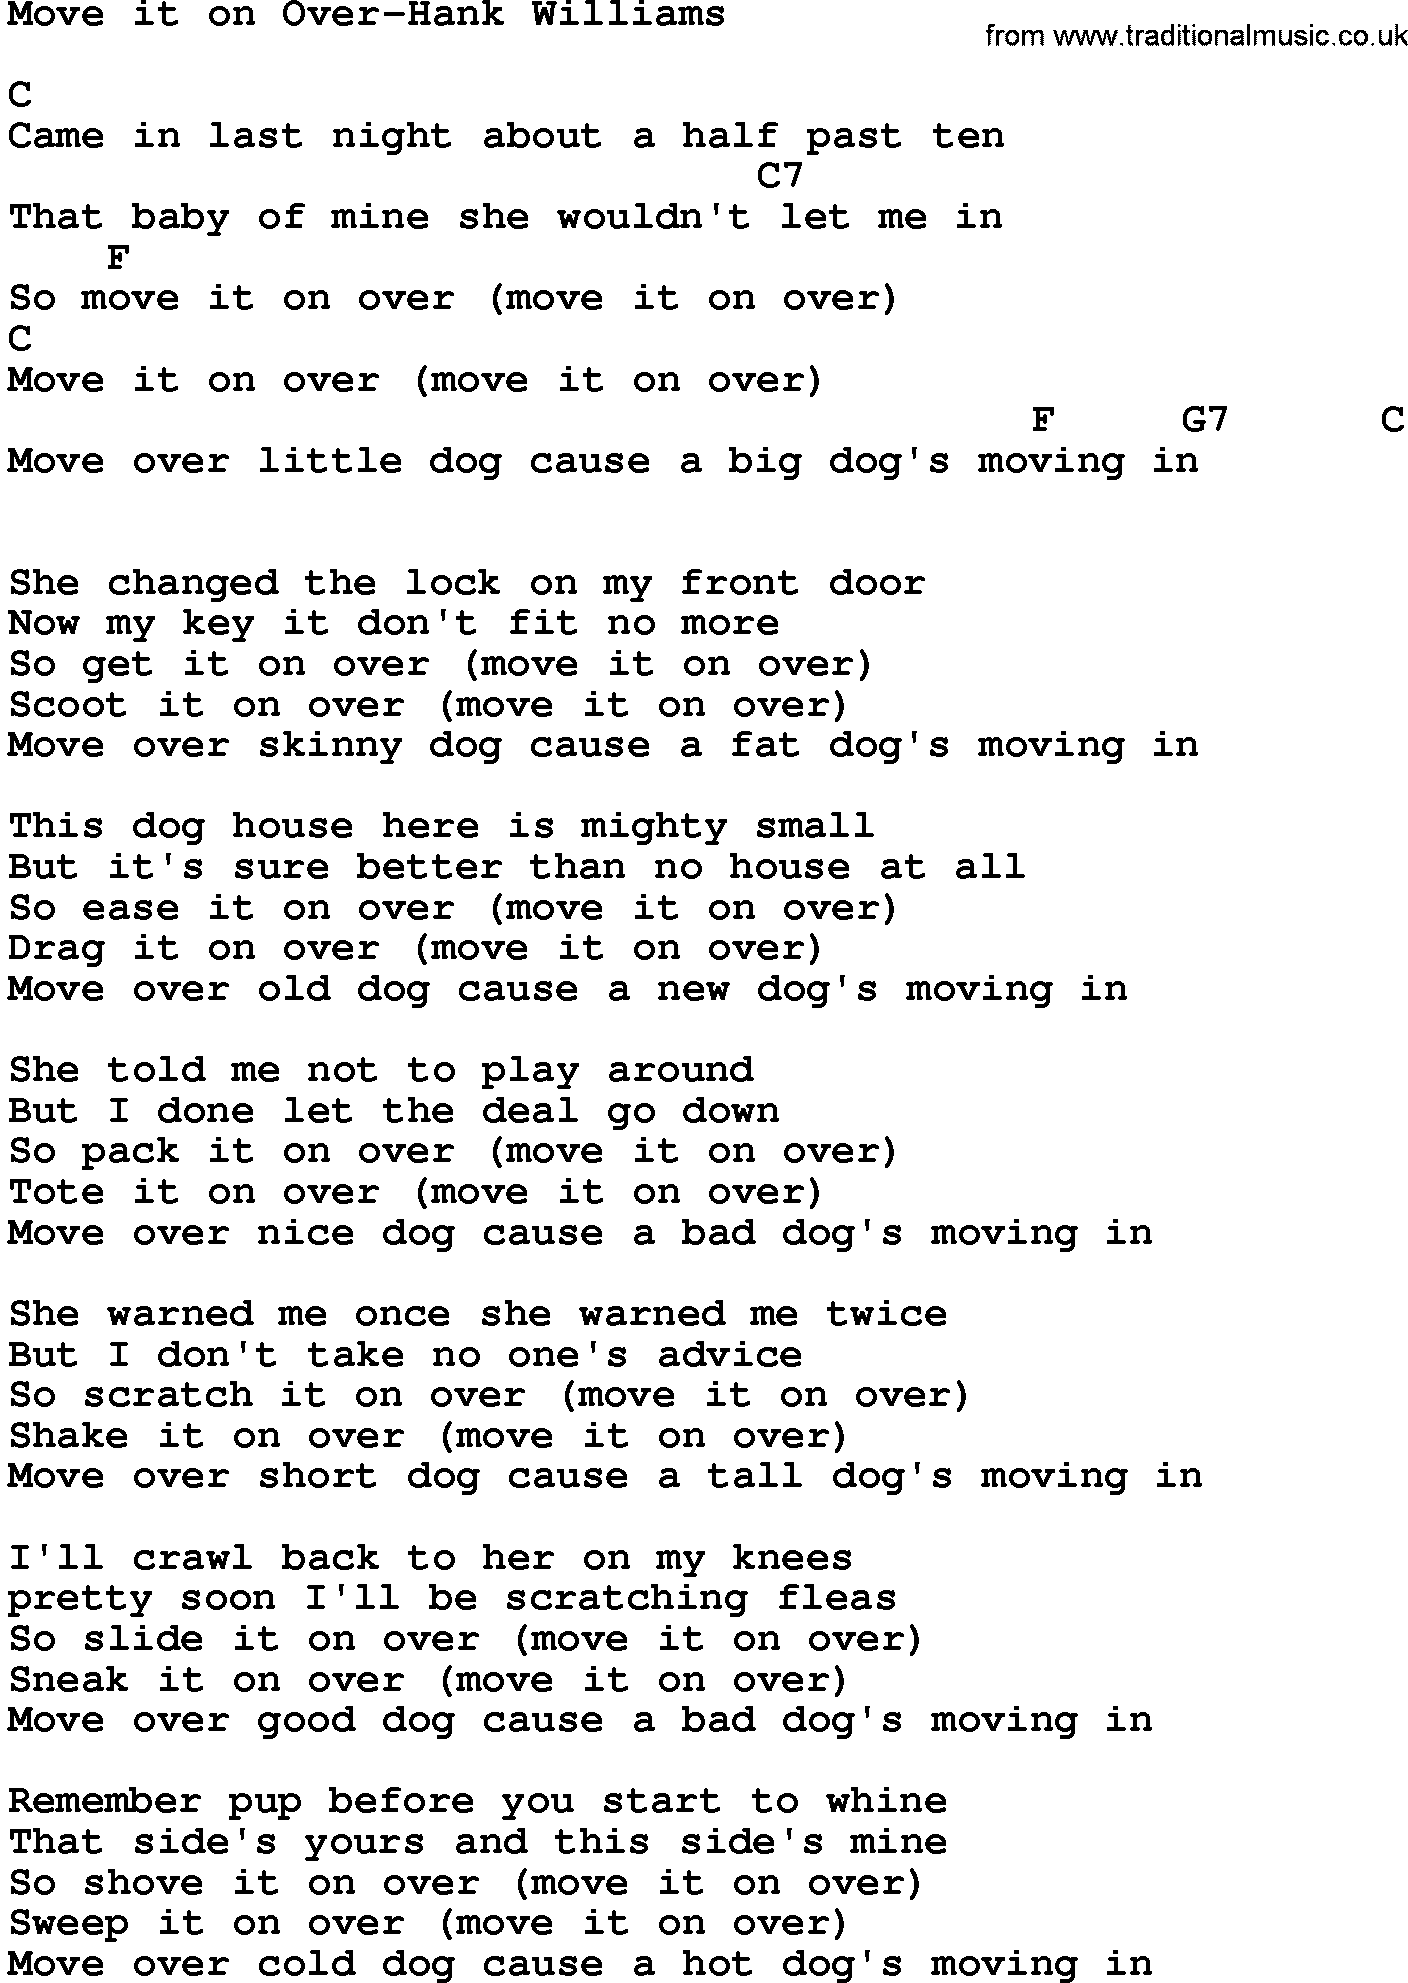 Country music song: Move It On Over-Hank Williams lyrics and chords